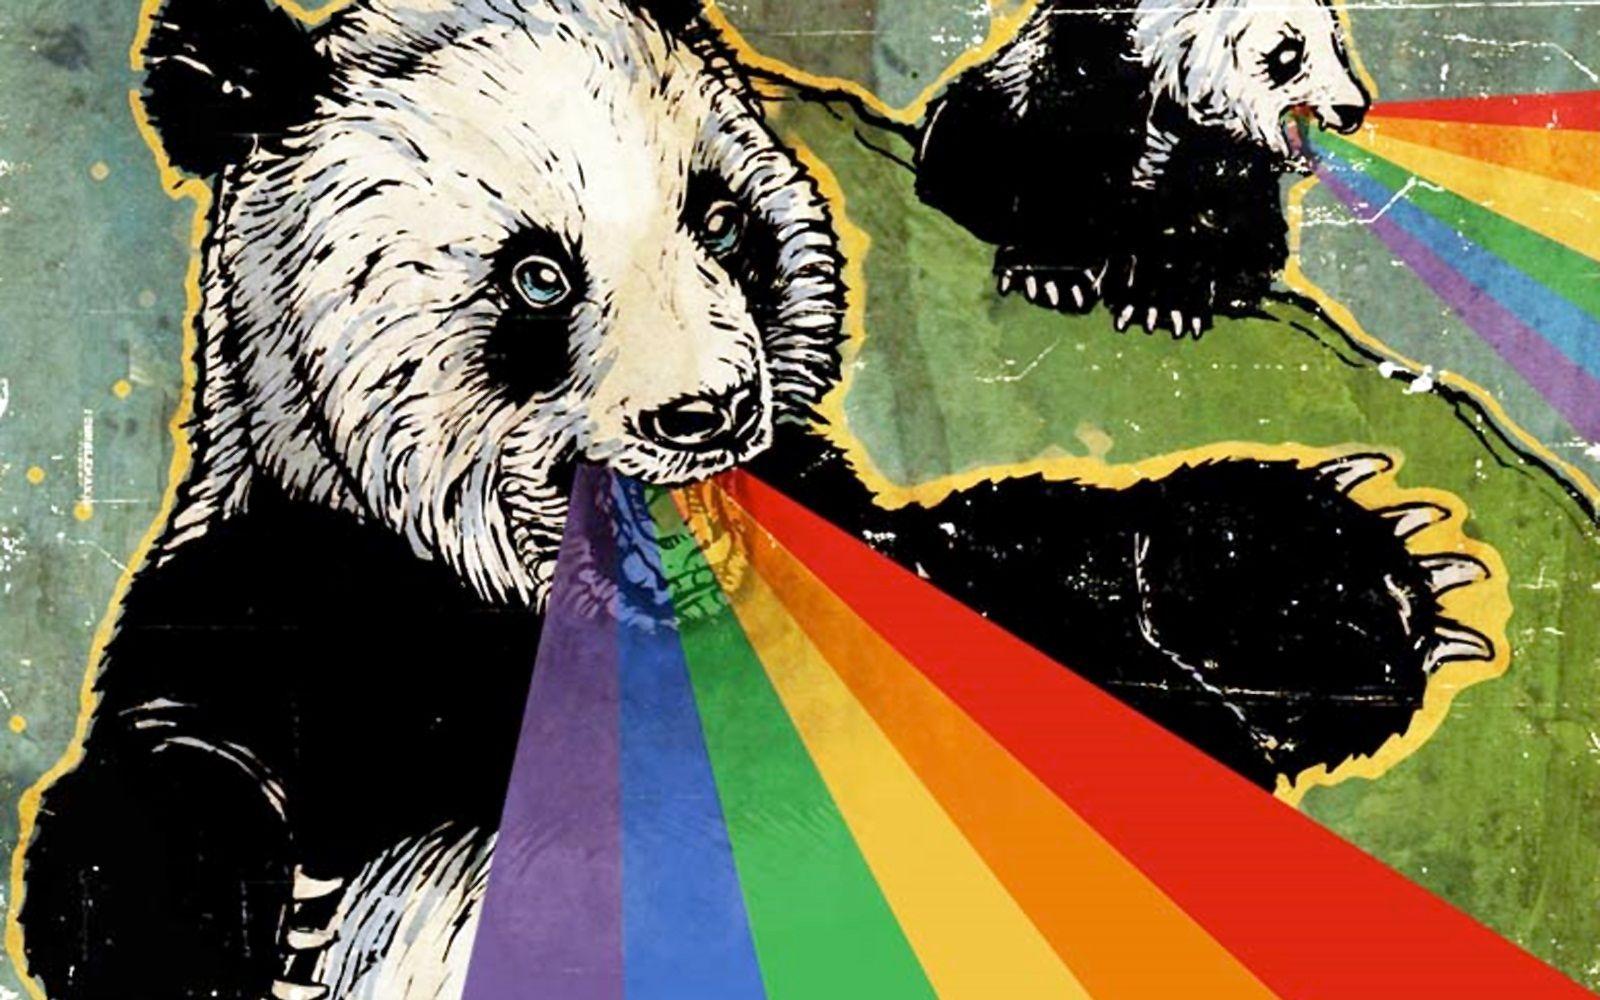 Panda's with rainbows coming out of their mouths. Of course. i <3